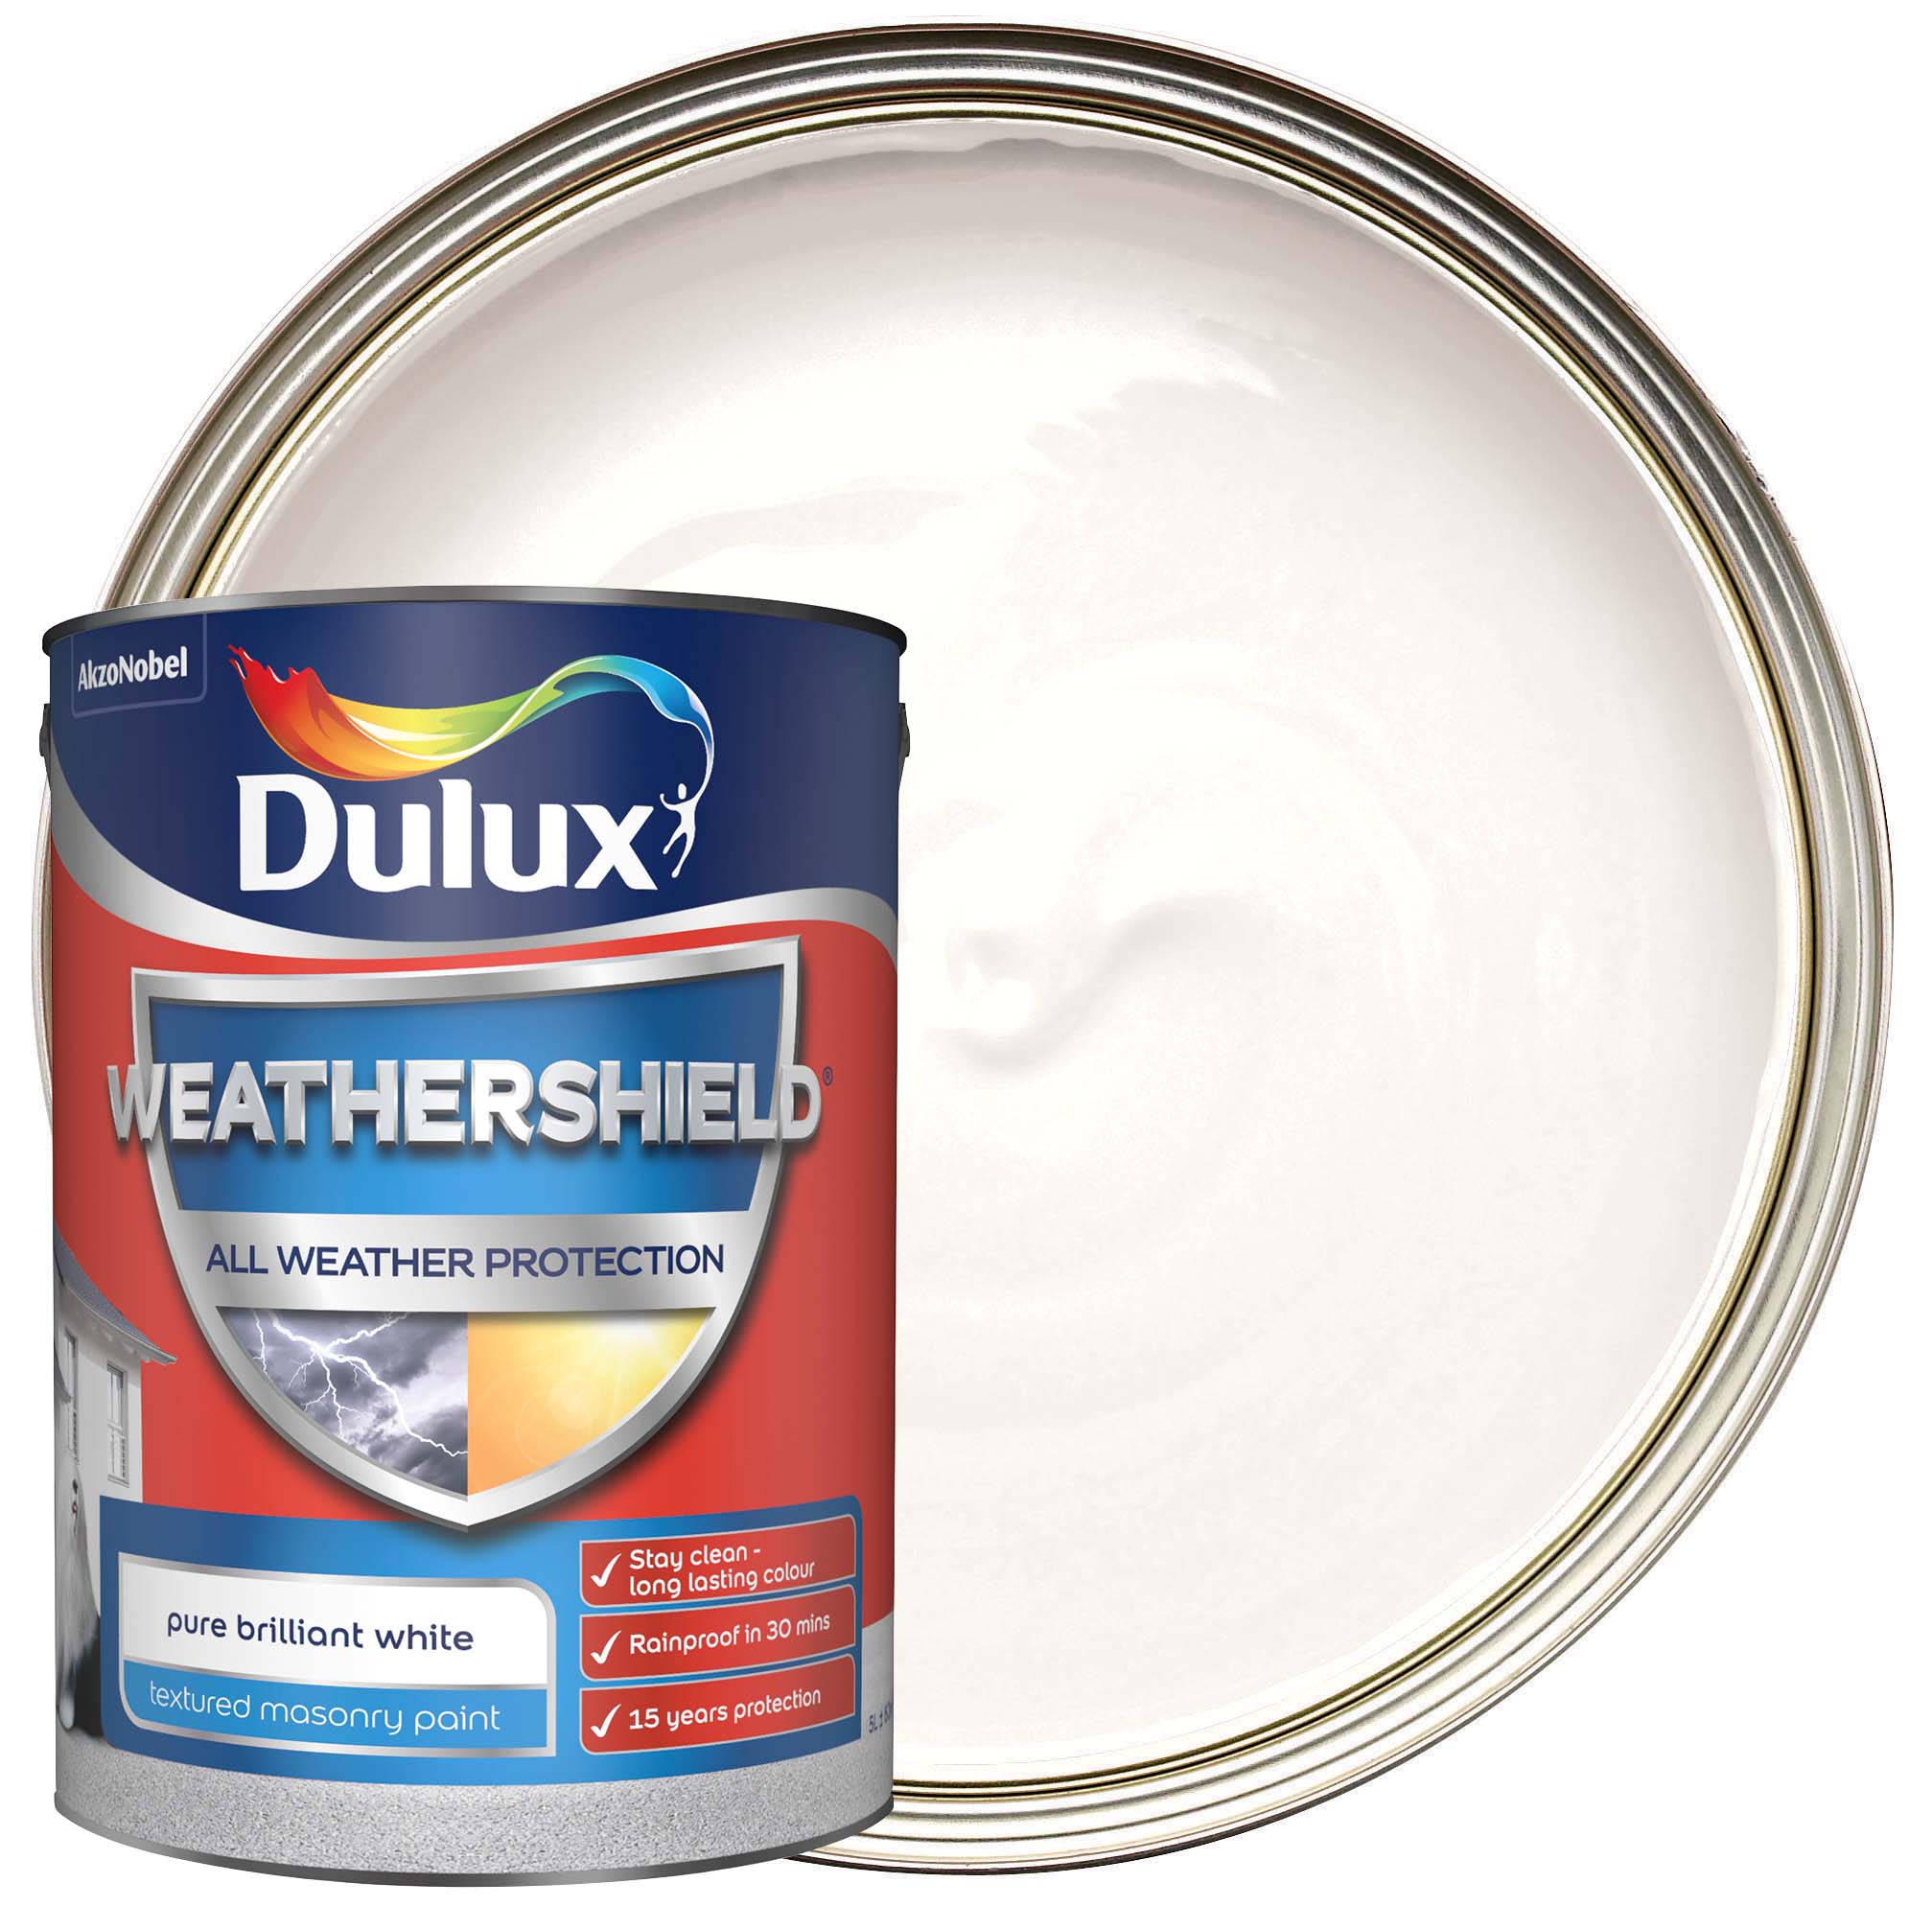 Image of Dulux Weathershield All Weather Purpose Textured Paint - Pure Brilliant White - 5L